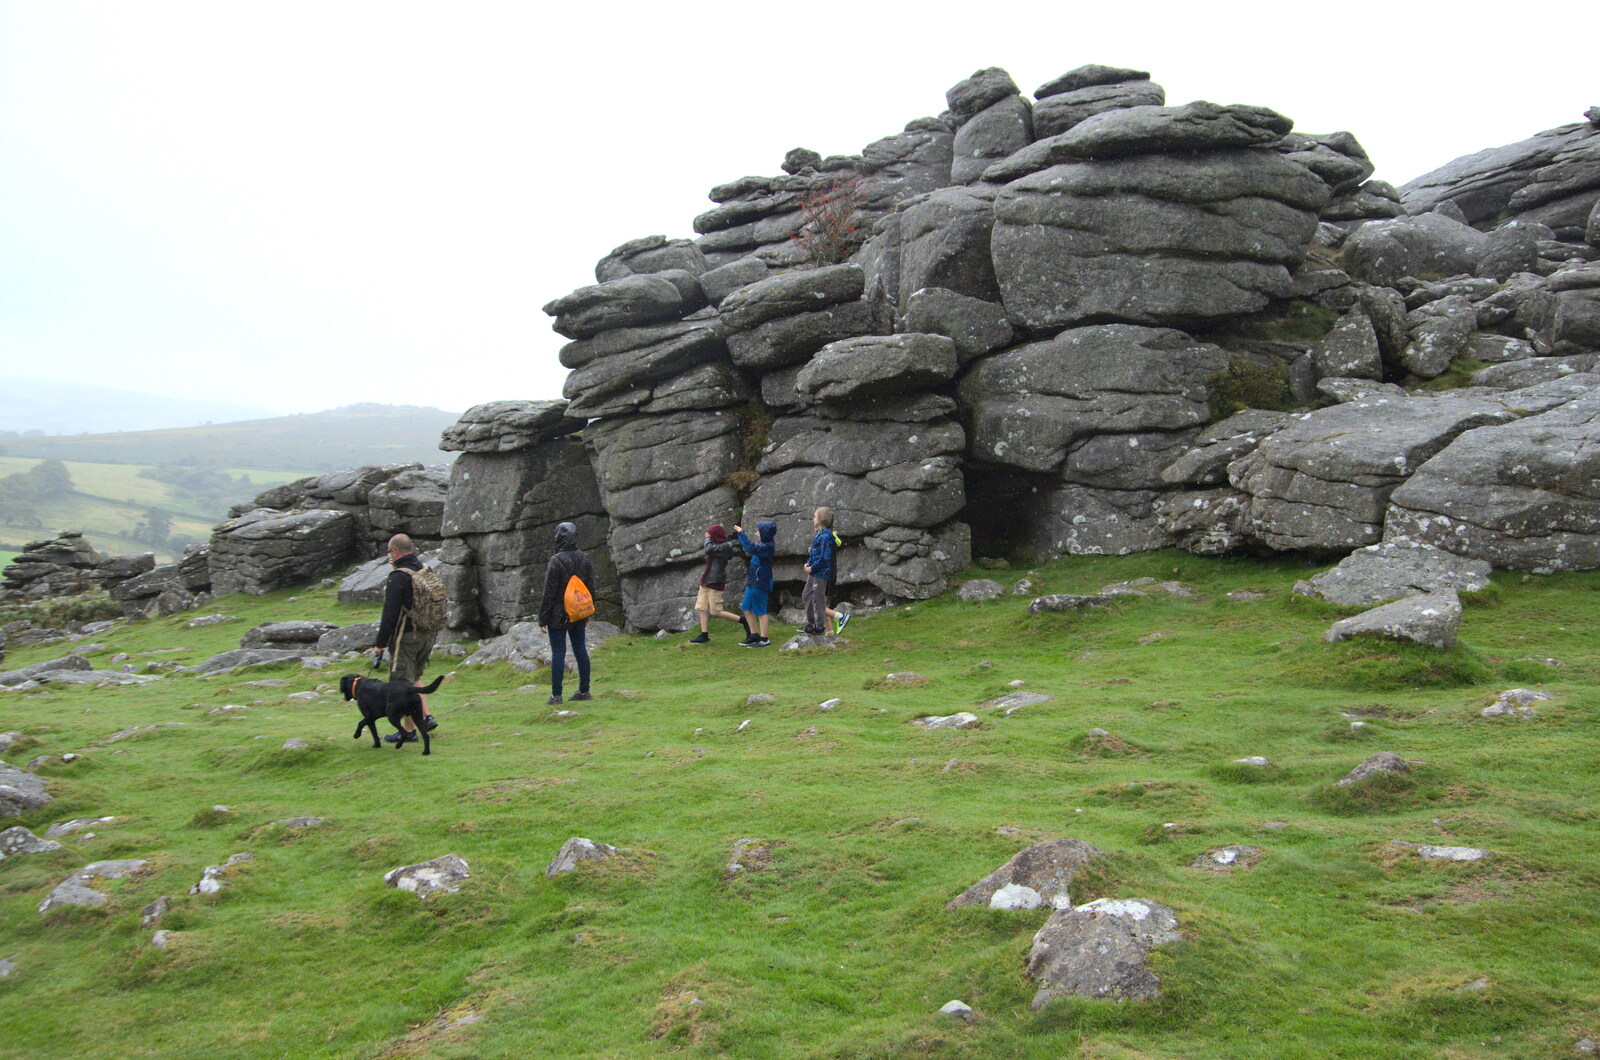 On the tor from A Walk up Hound Tor, Dartmoor, Devon - 24th August 2020